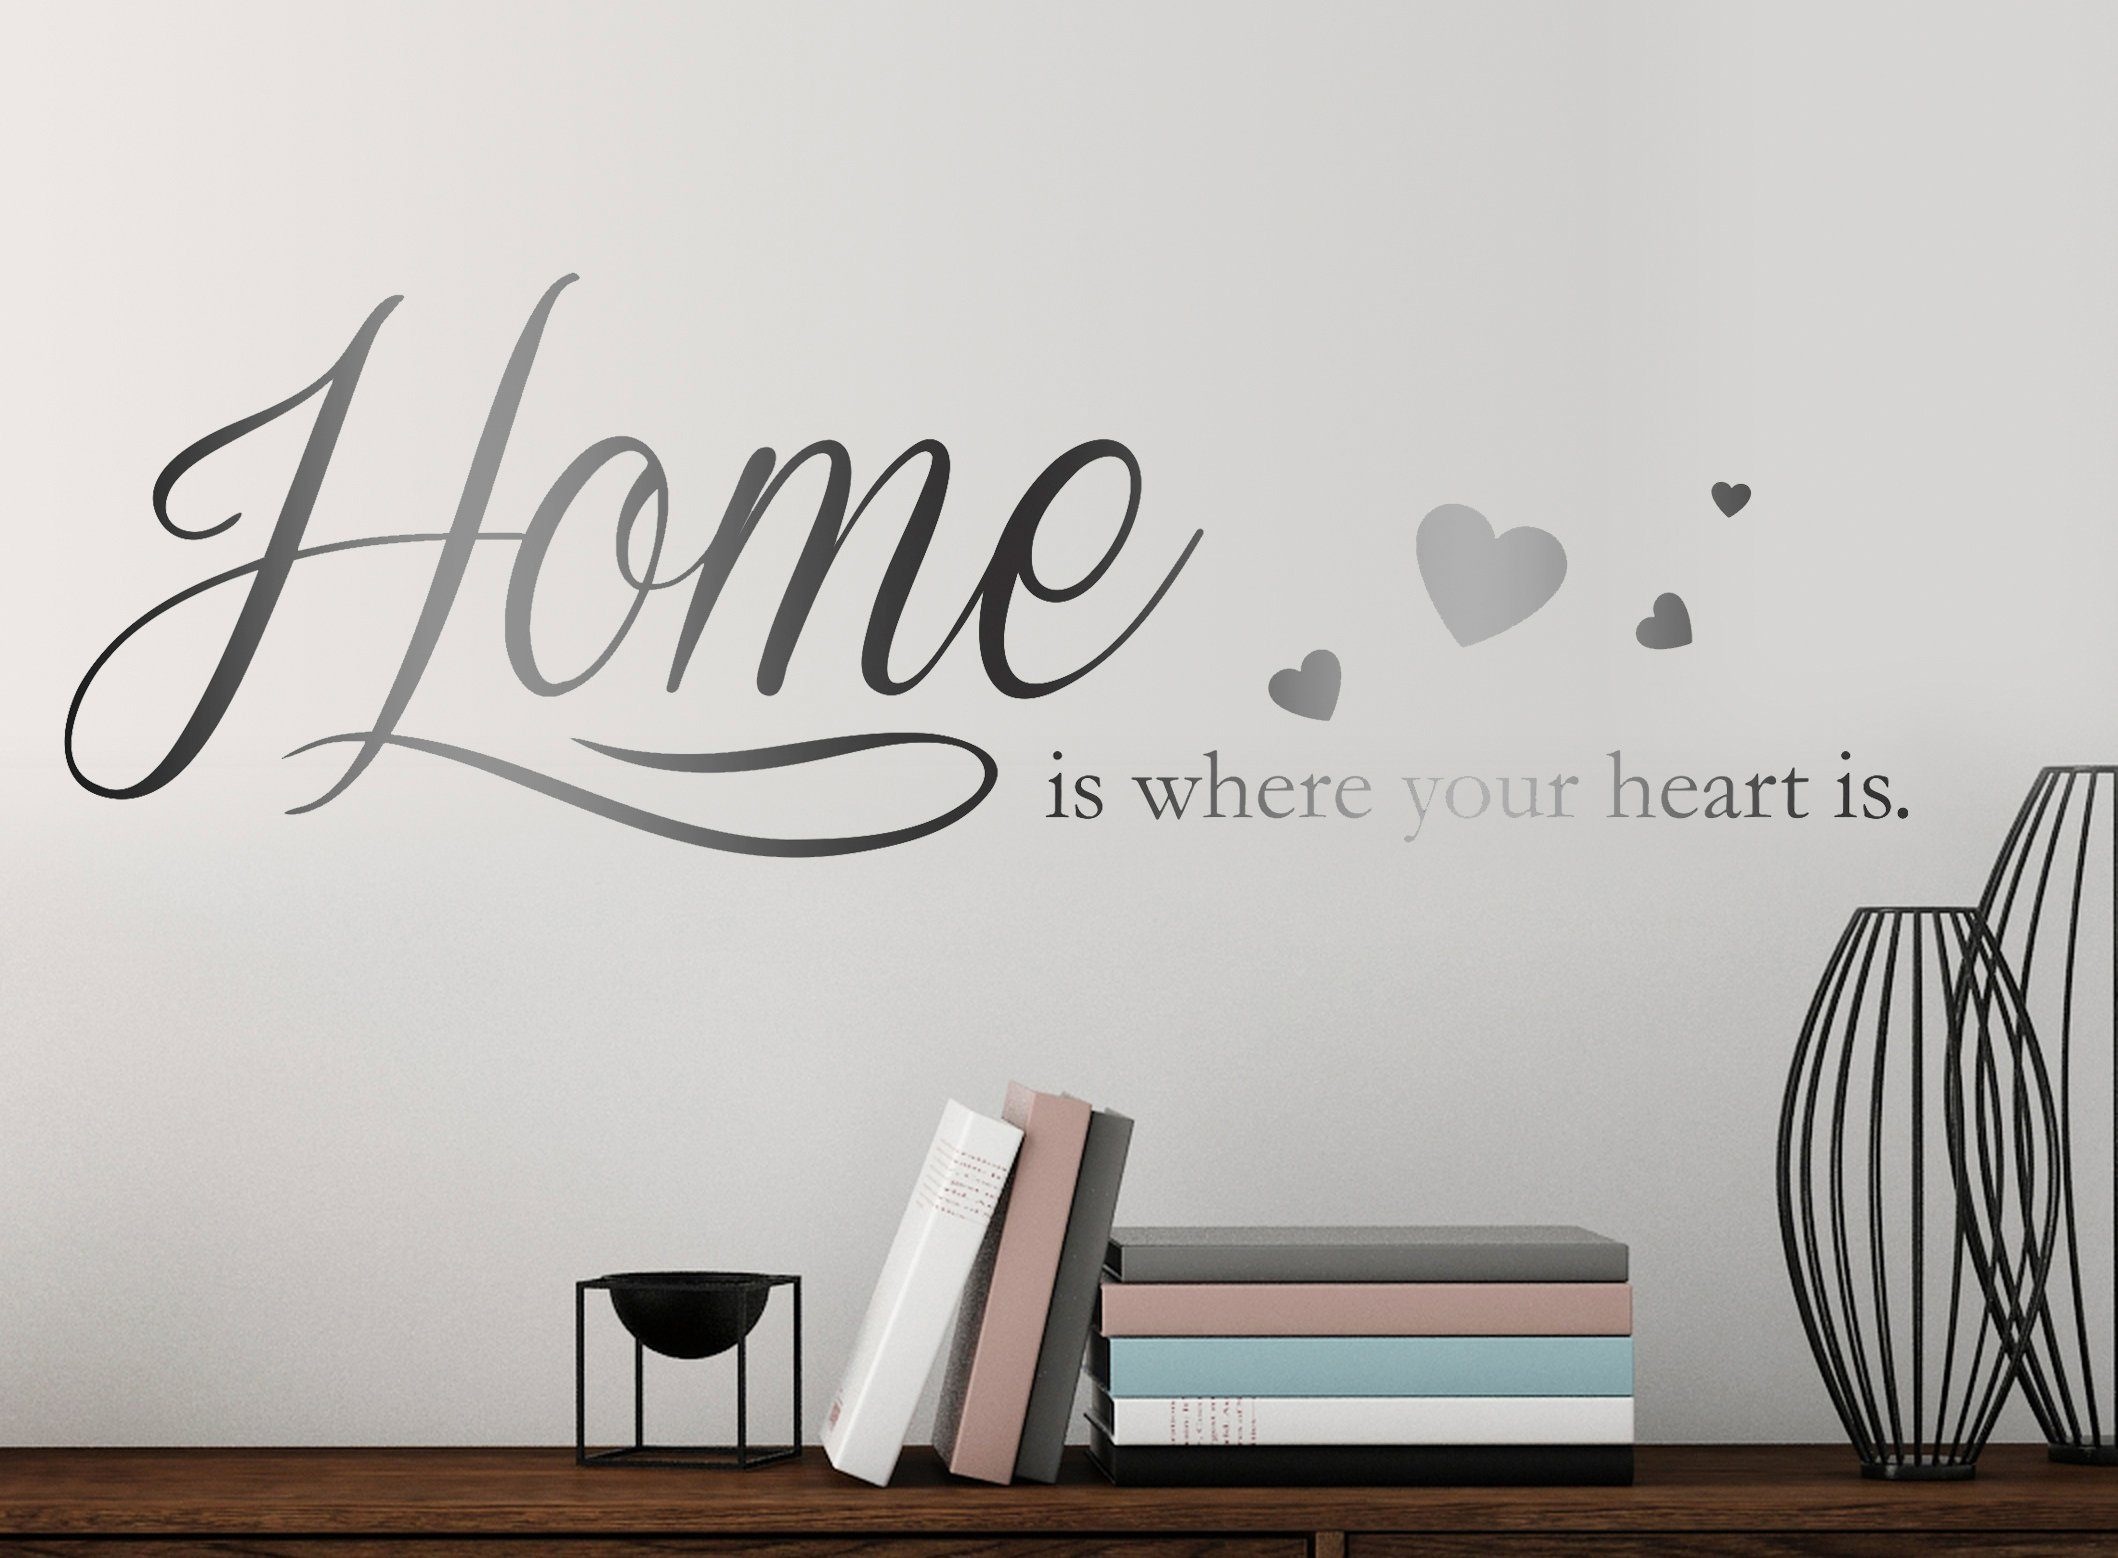 queence Wandtattoo »Home ist where your heart is.«, 120 x 30 cm